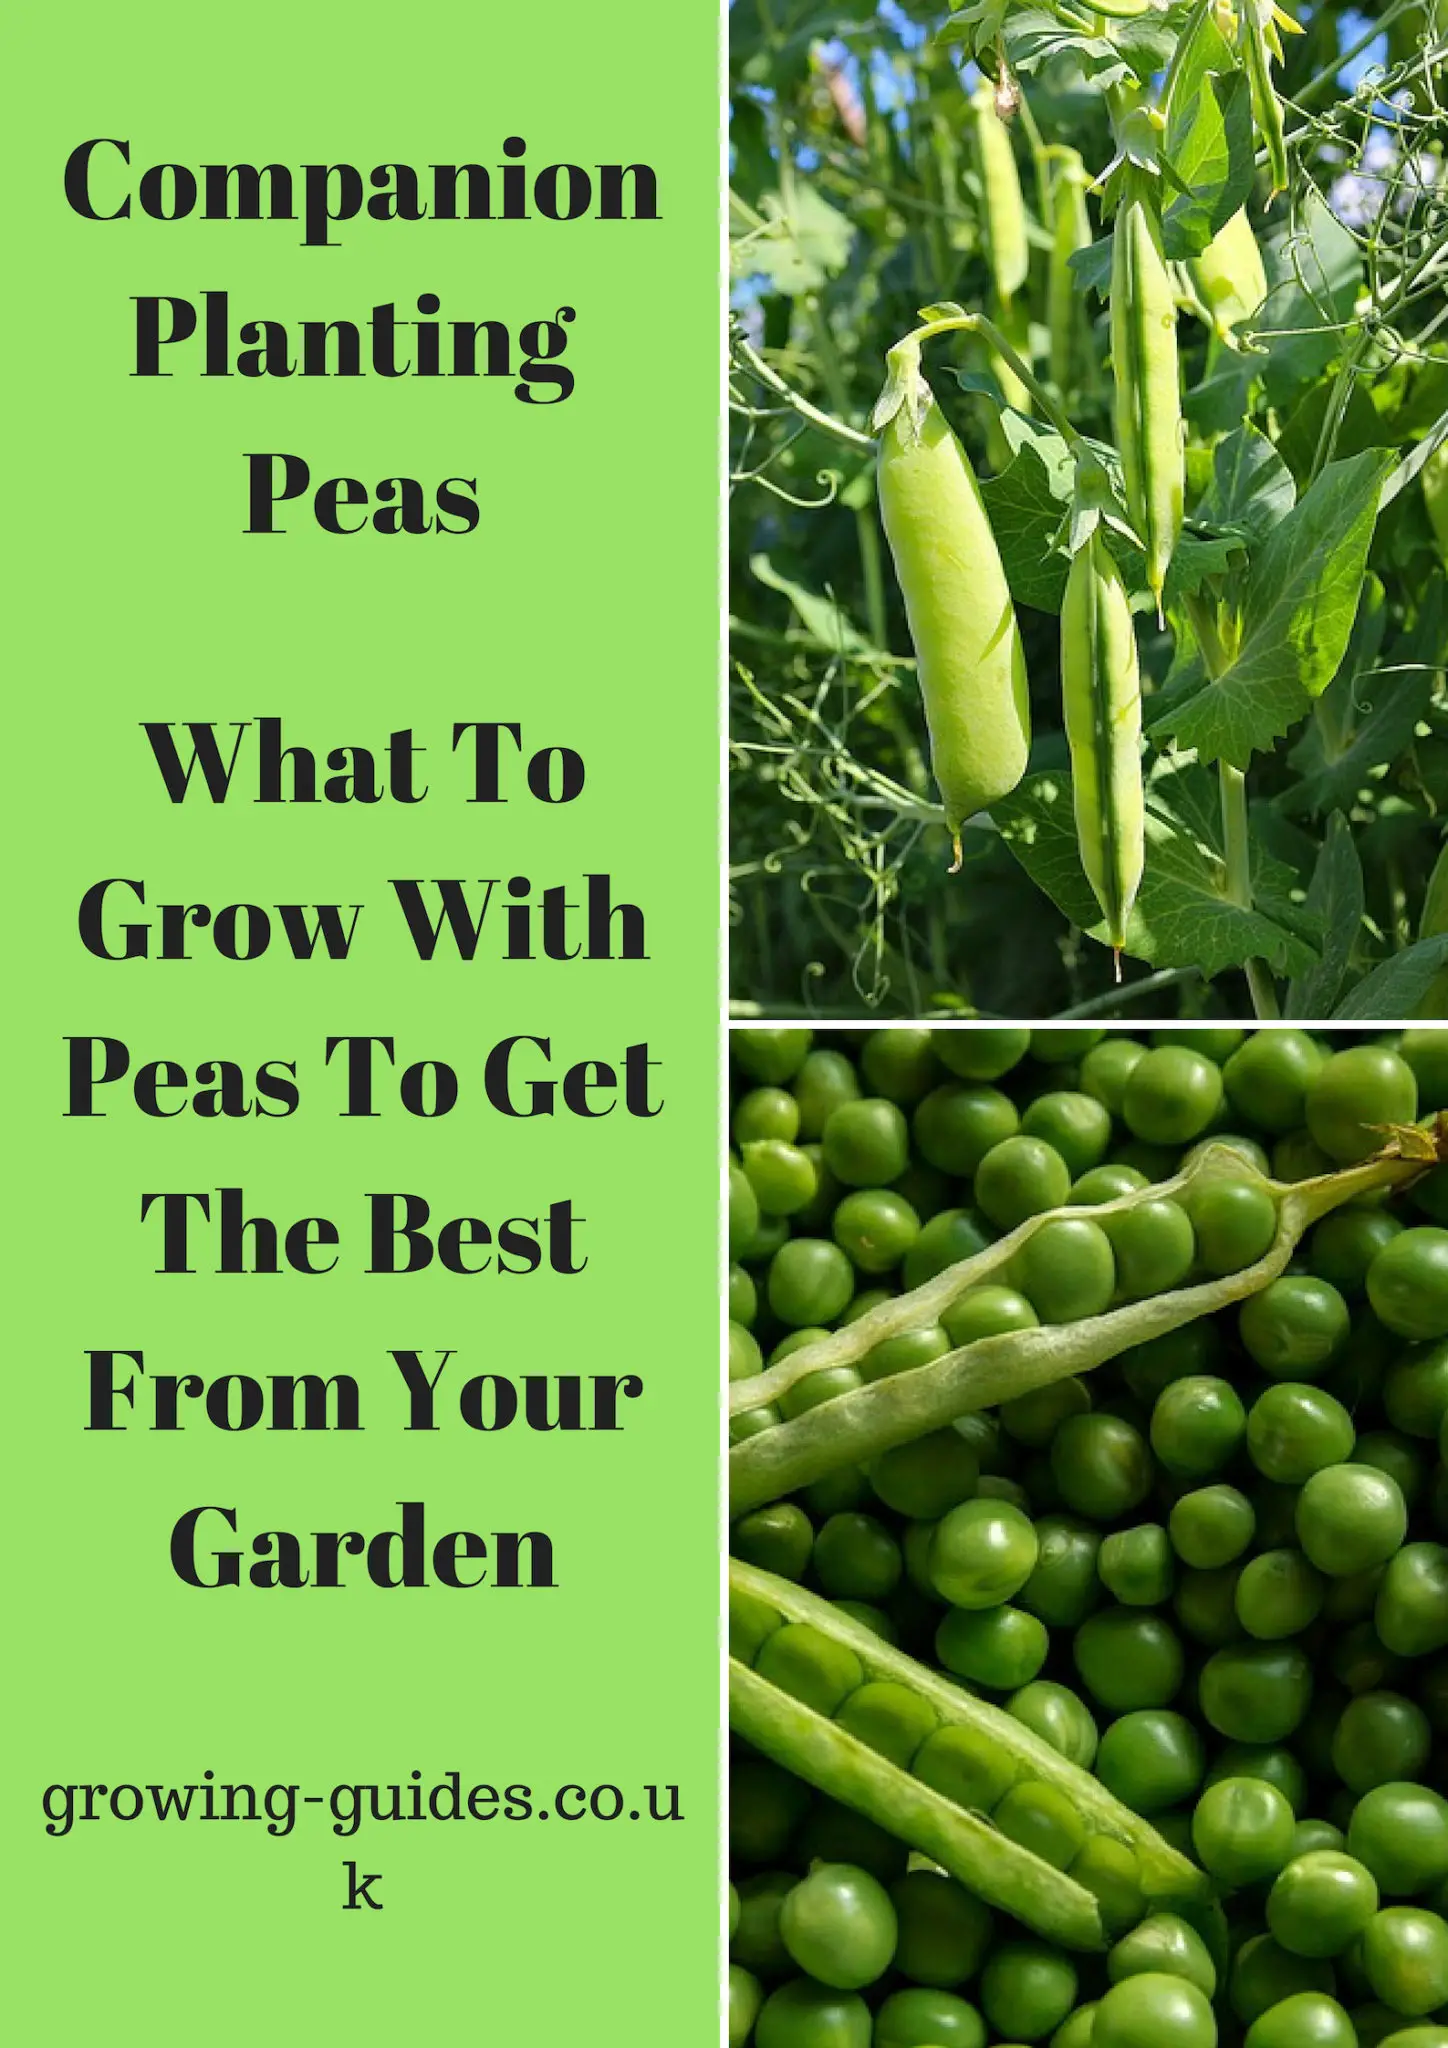 Image of Peas companion plant for carrots